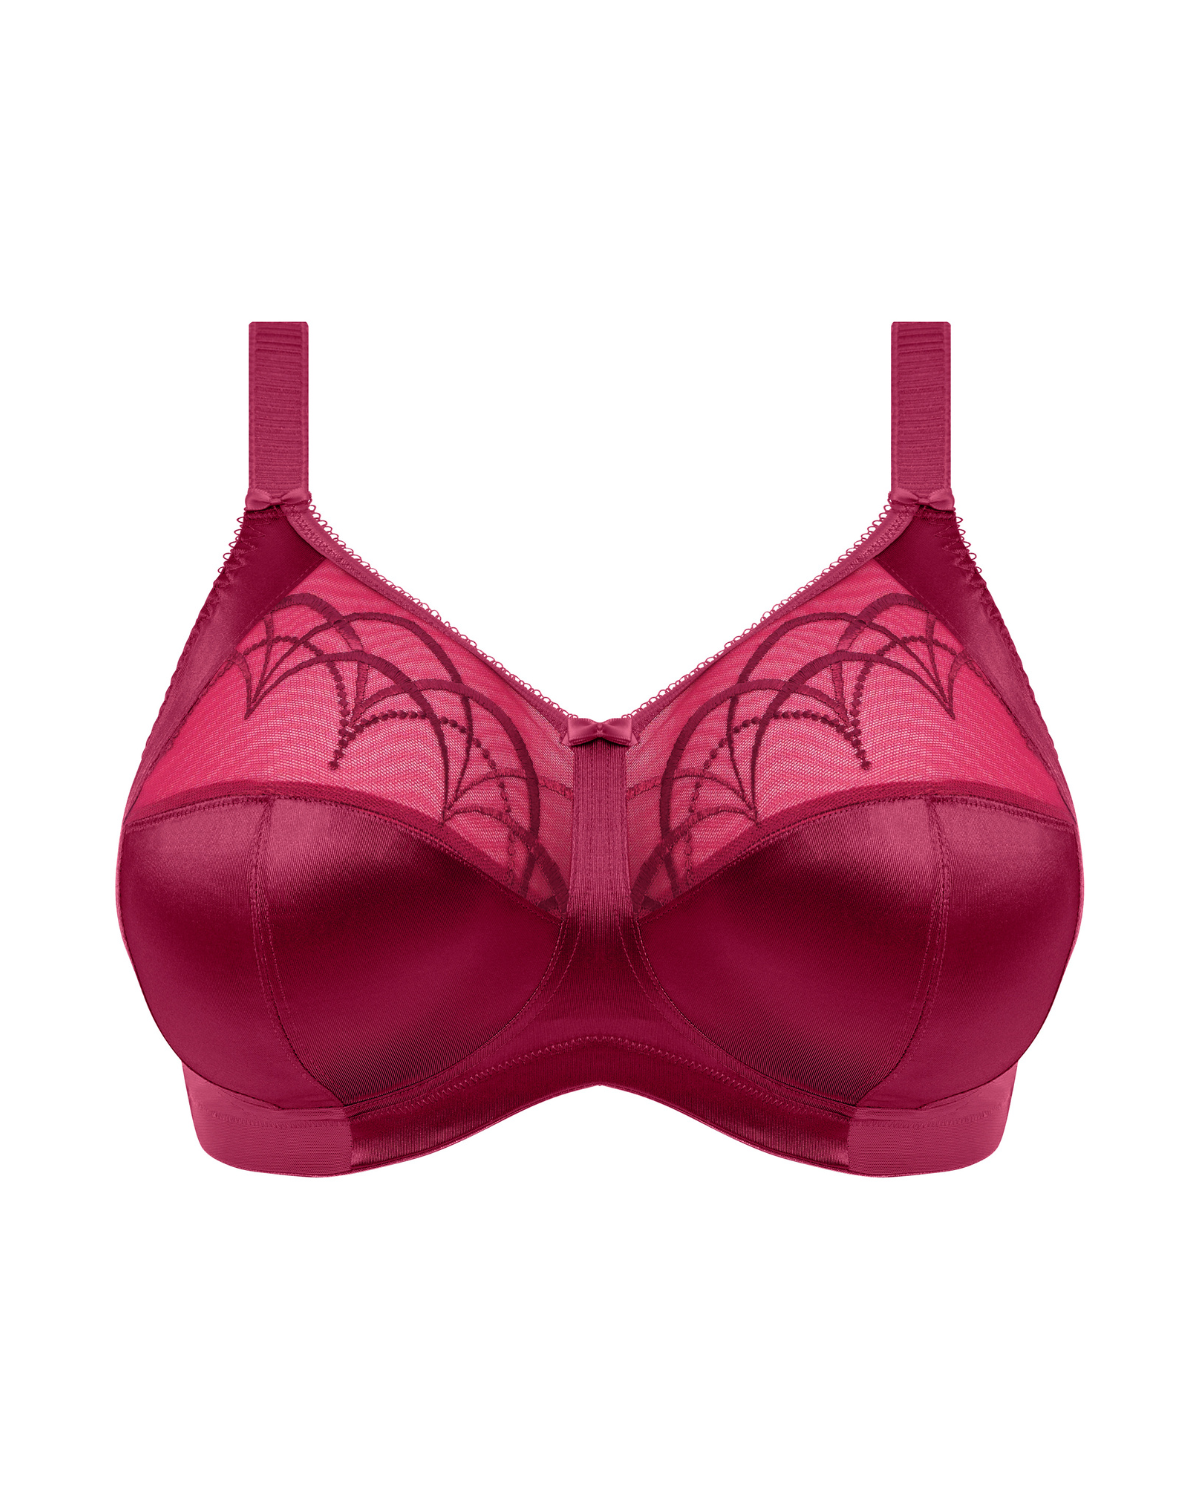 Elomi Cate Wire Free Bra (More colors available) - 4033 - Berry – Blum's  Swimwear & Intimate Apparel